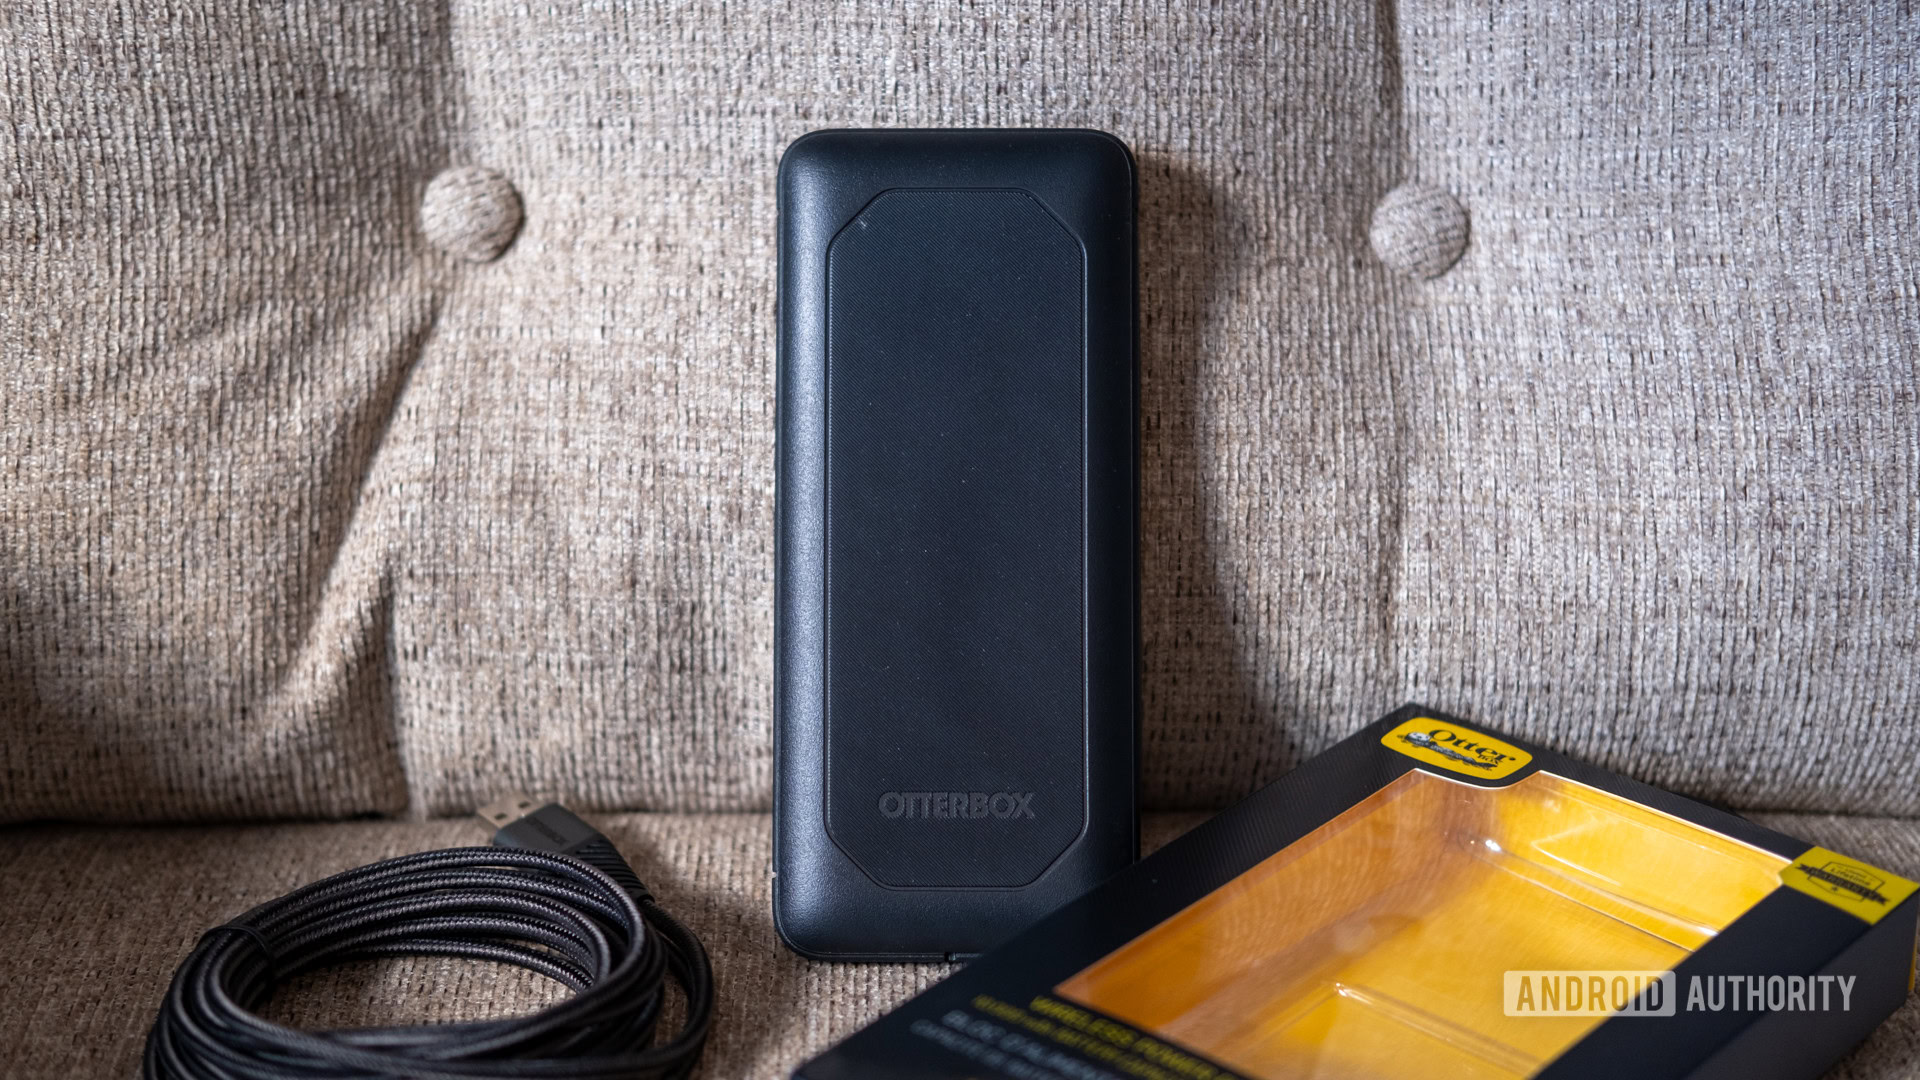 The Otterbox Wireless Power Pack above the cable and charger